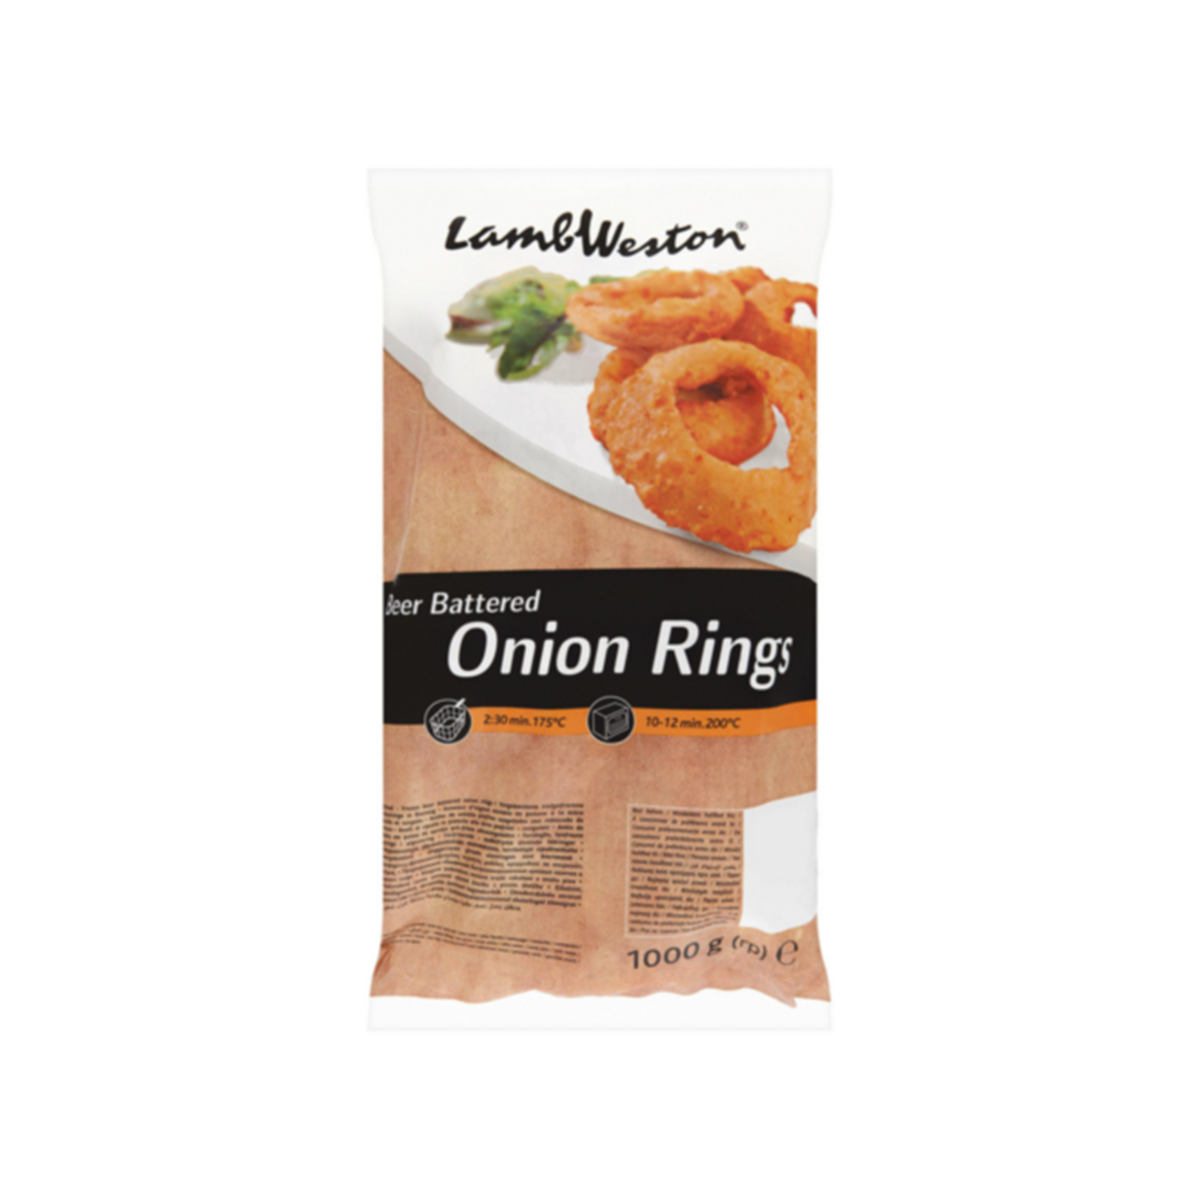 Beer Battered Onion Ring